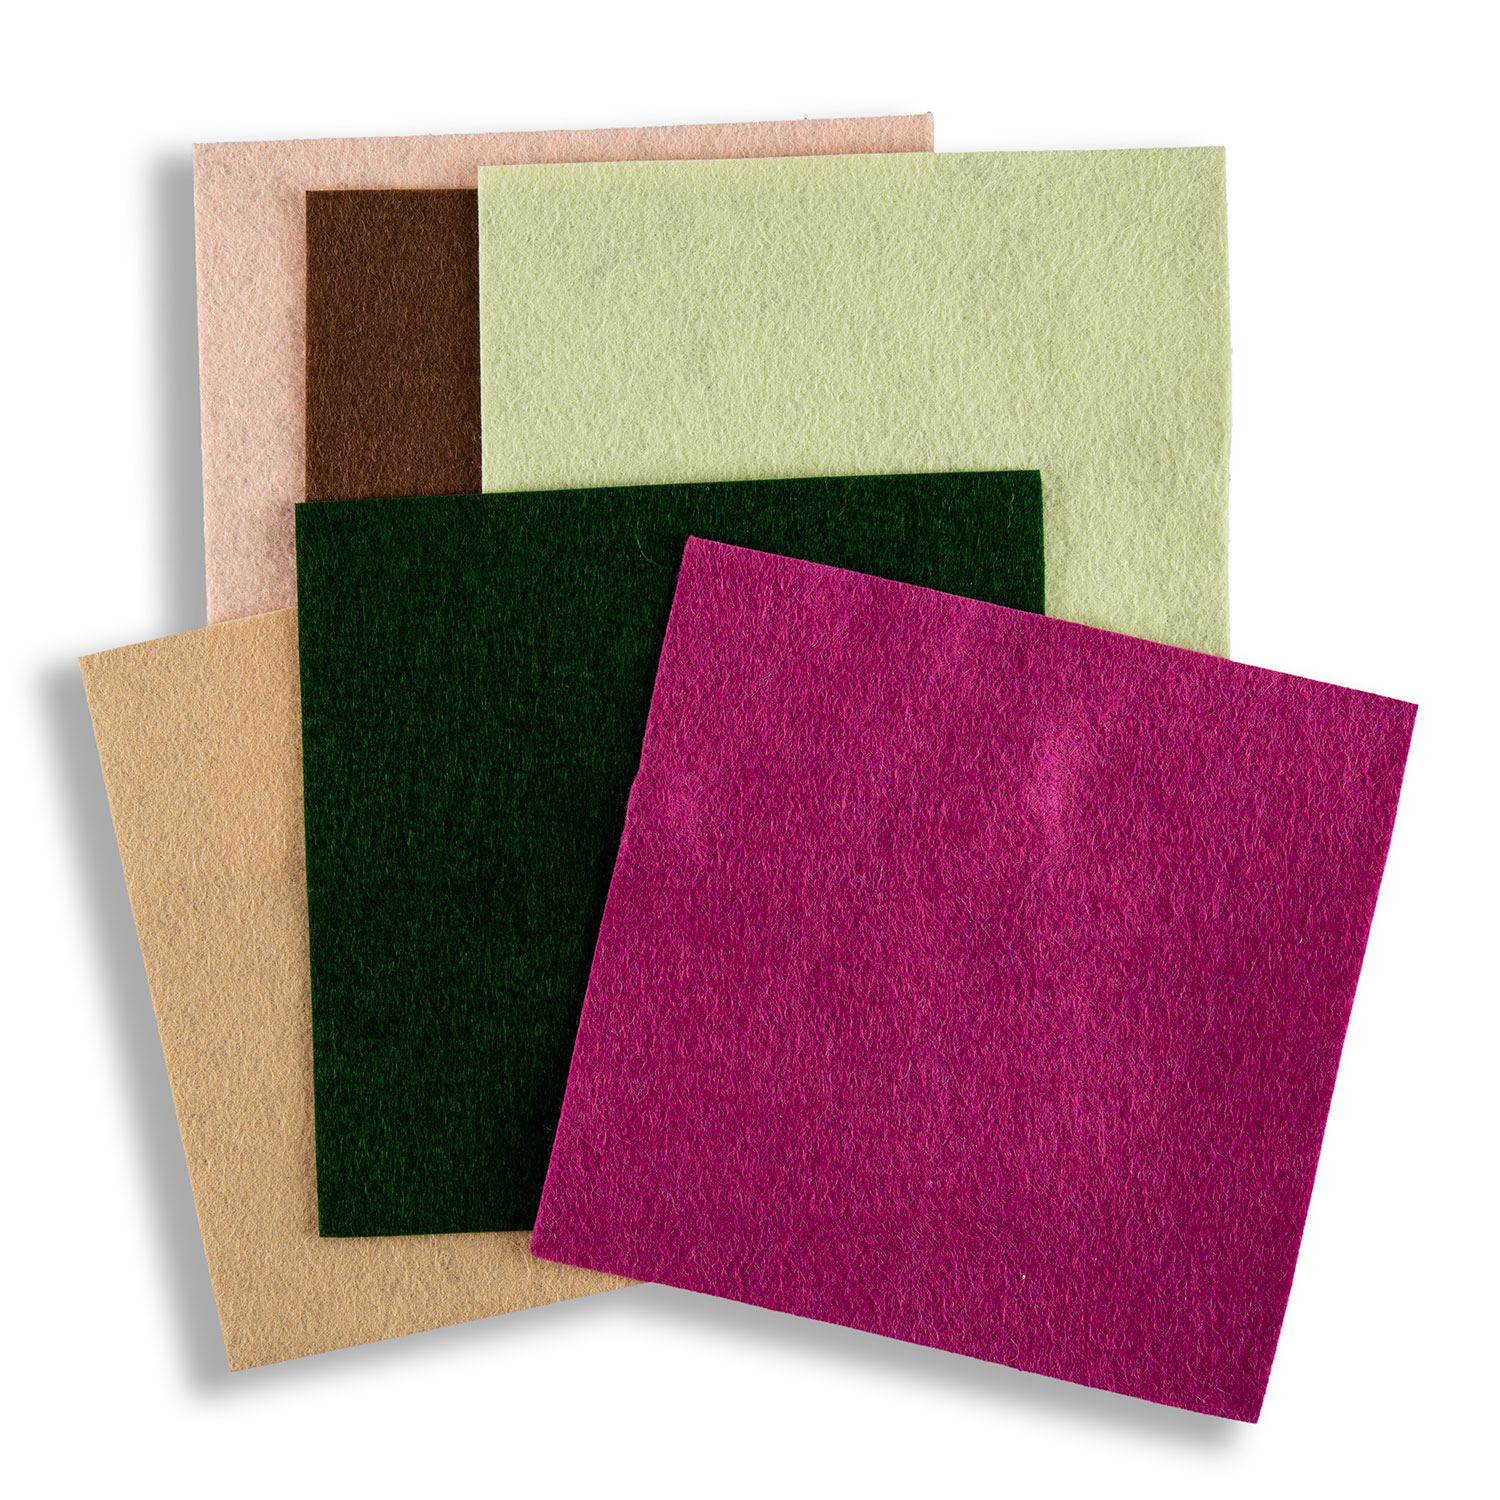 Felt by Clarity Pack of 6 Non-Adhesive Mixed Colour Felt 6x6" Squares Pick N Mix - Pick Any 2 - Funky Holly Leaf